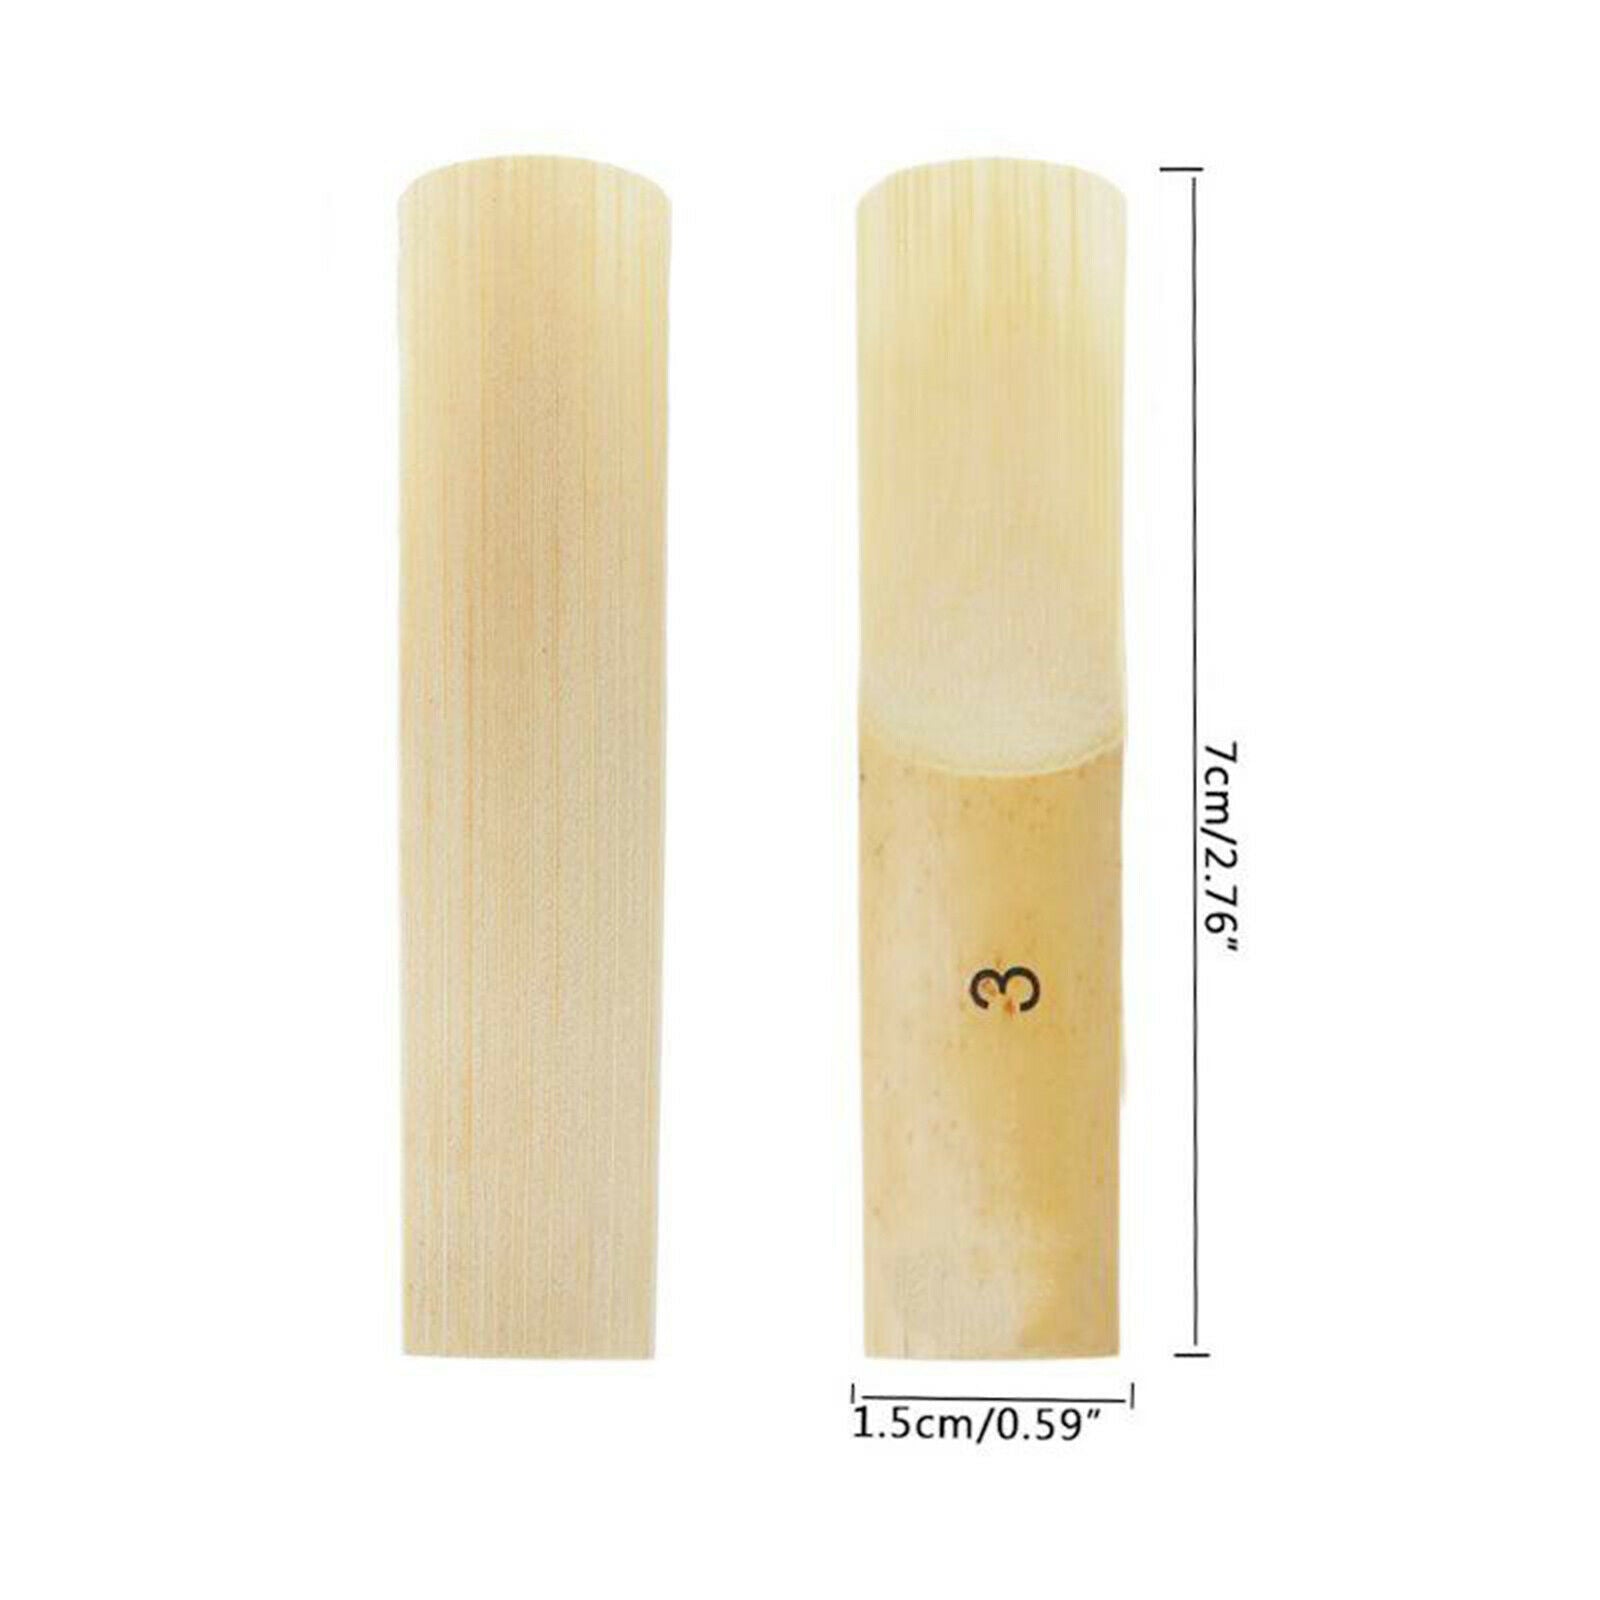 10x Traditional Eb Alto Saxophone Reeds Strength 1.5-4 Reed Accessories - 2.0